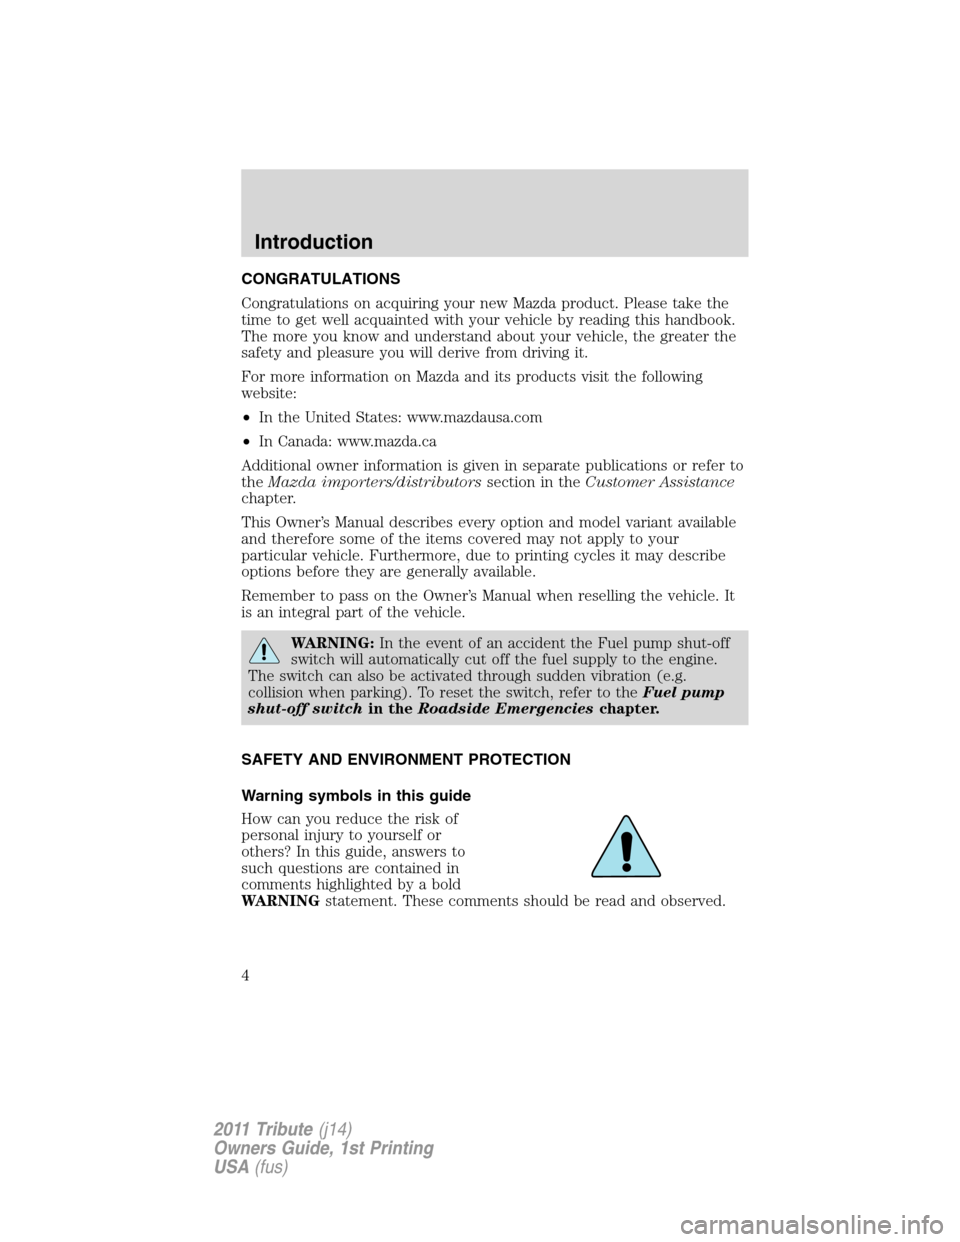 MAZDA MODEL TRIBUTE 2011  Owners Manual (in English) CONGRATULATIONS
Congratulations on acquiring your new Mazda product. Please take the
time to get well acquainted with your vehicle by reading this handbook.
The more you know and understand about your